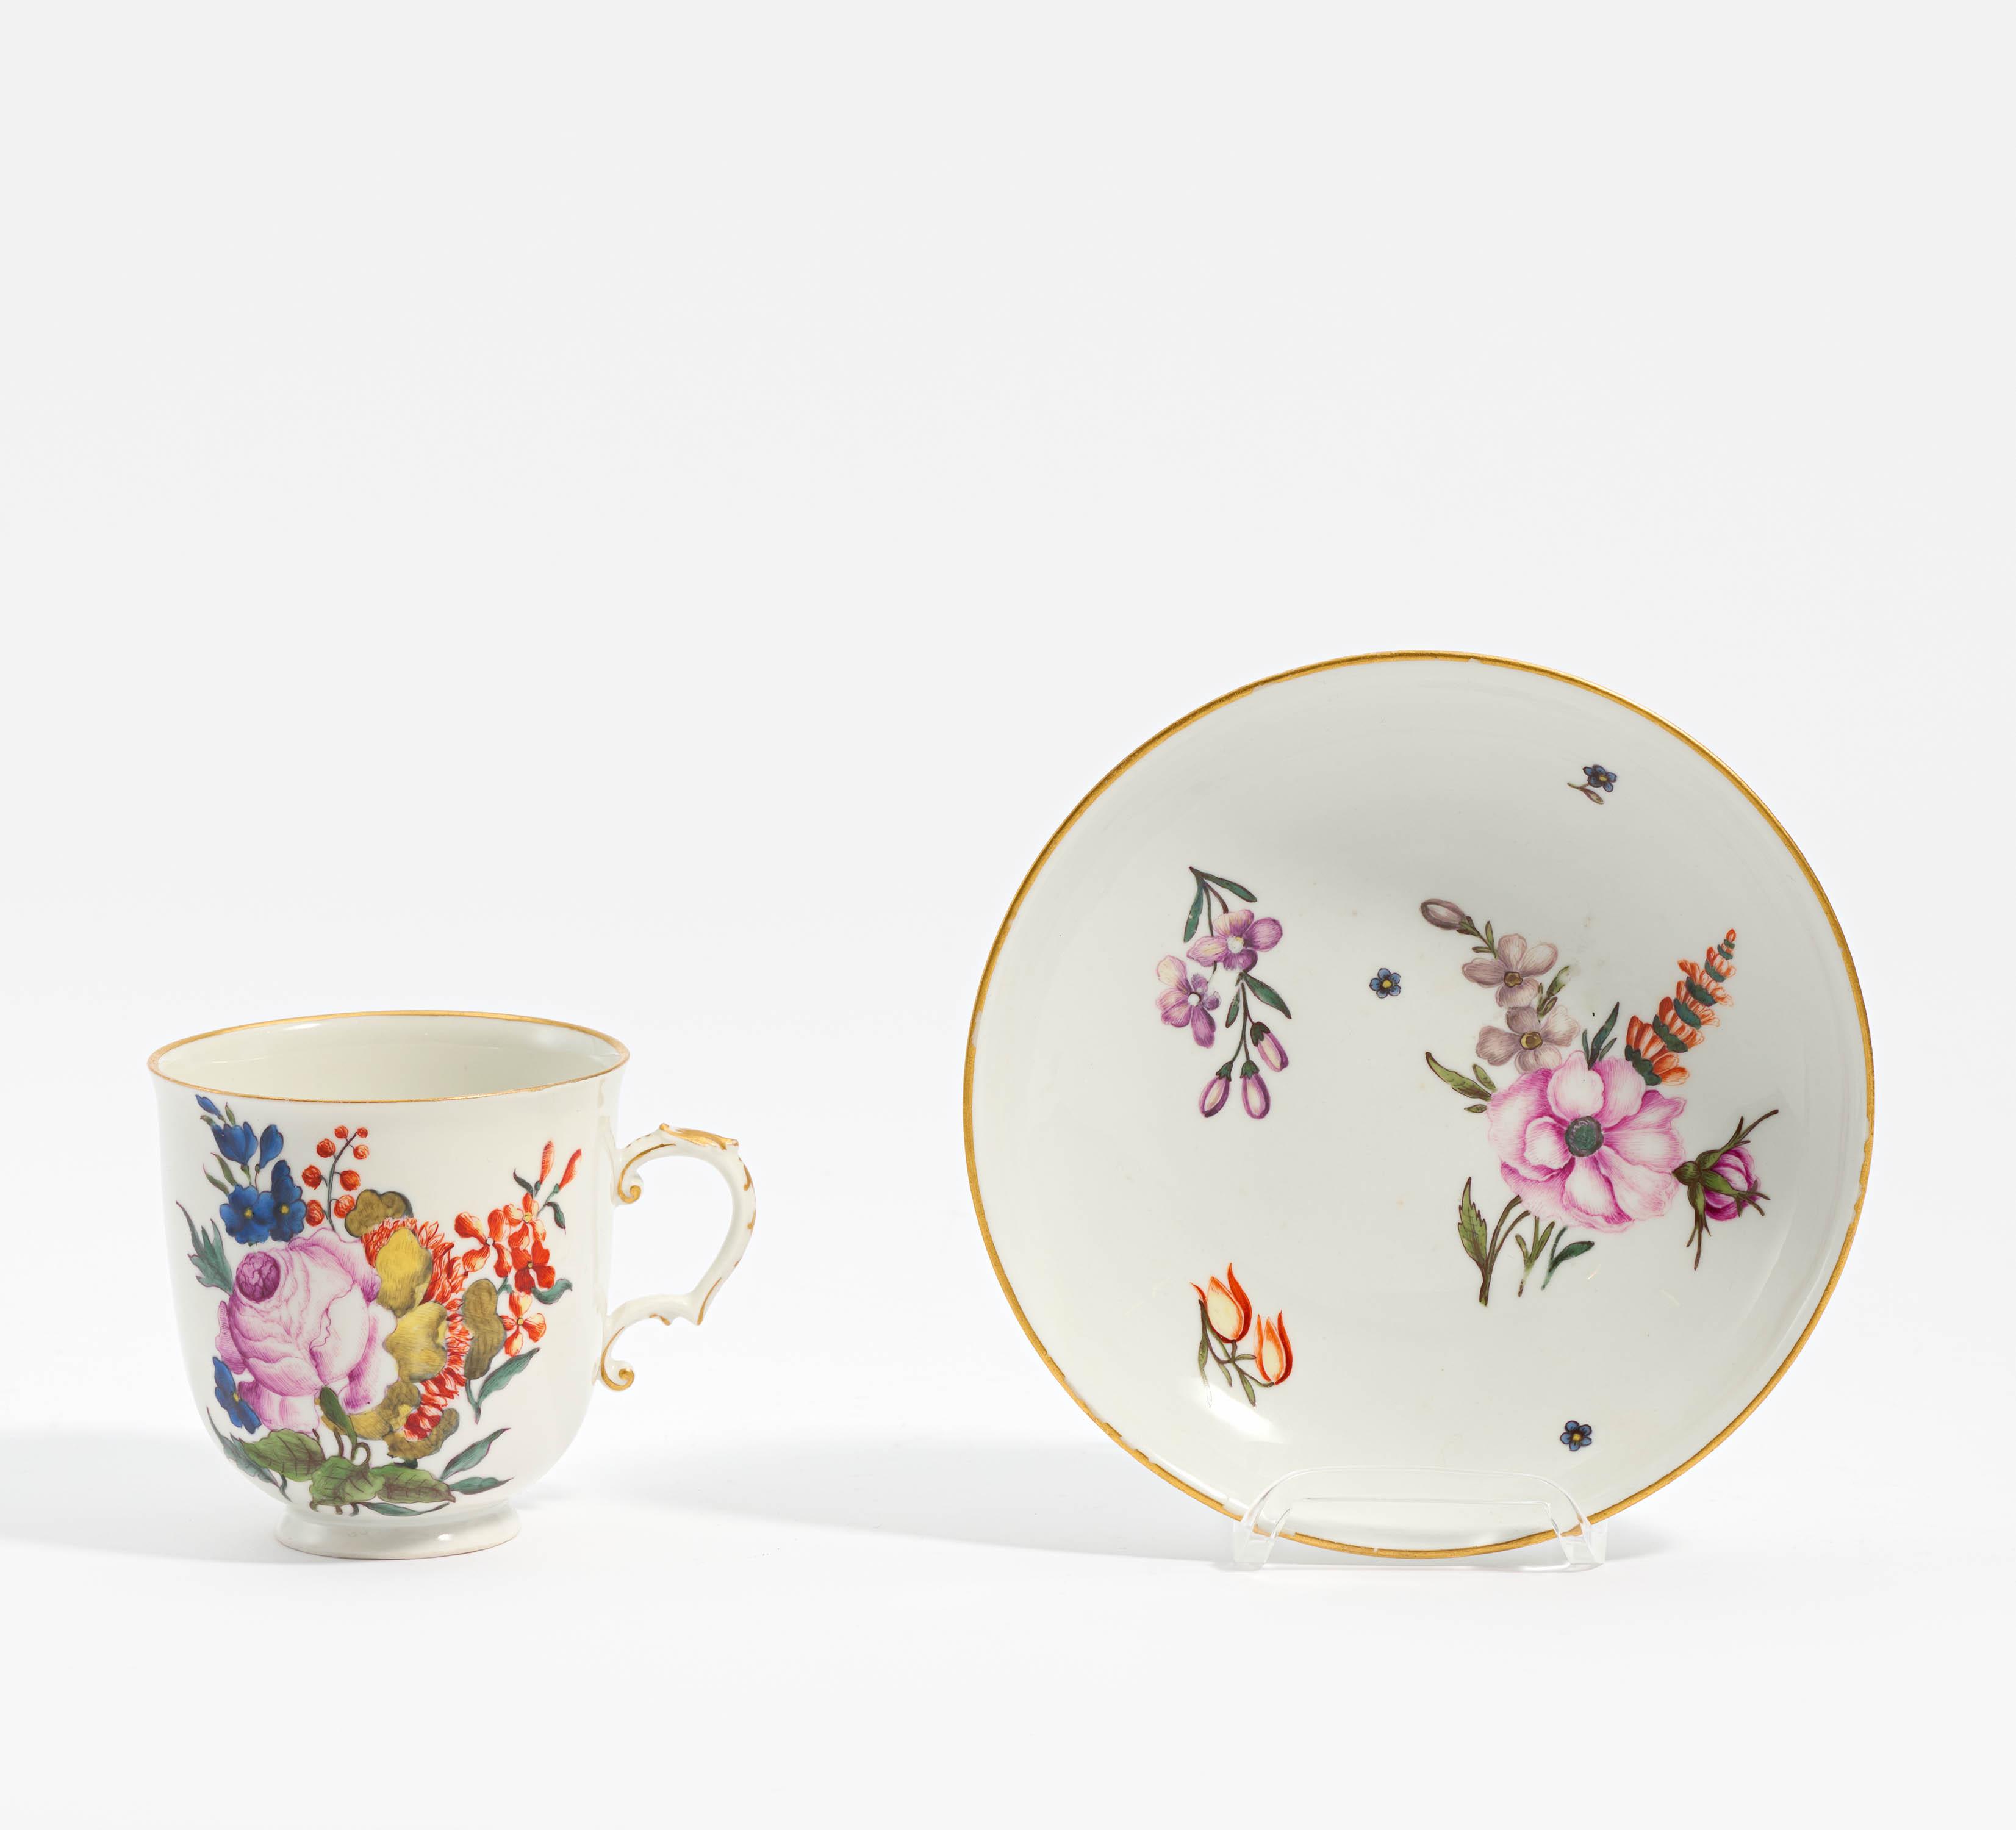 Cup and saucer with floral décor